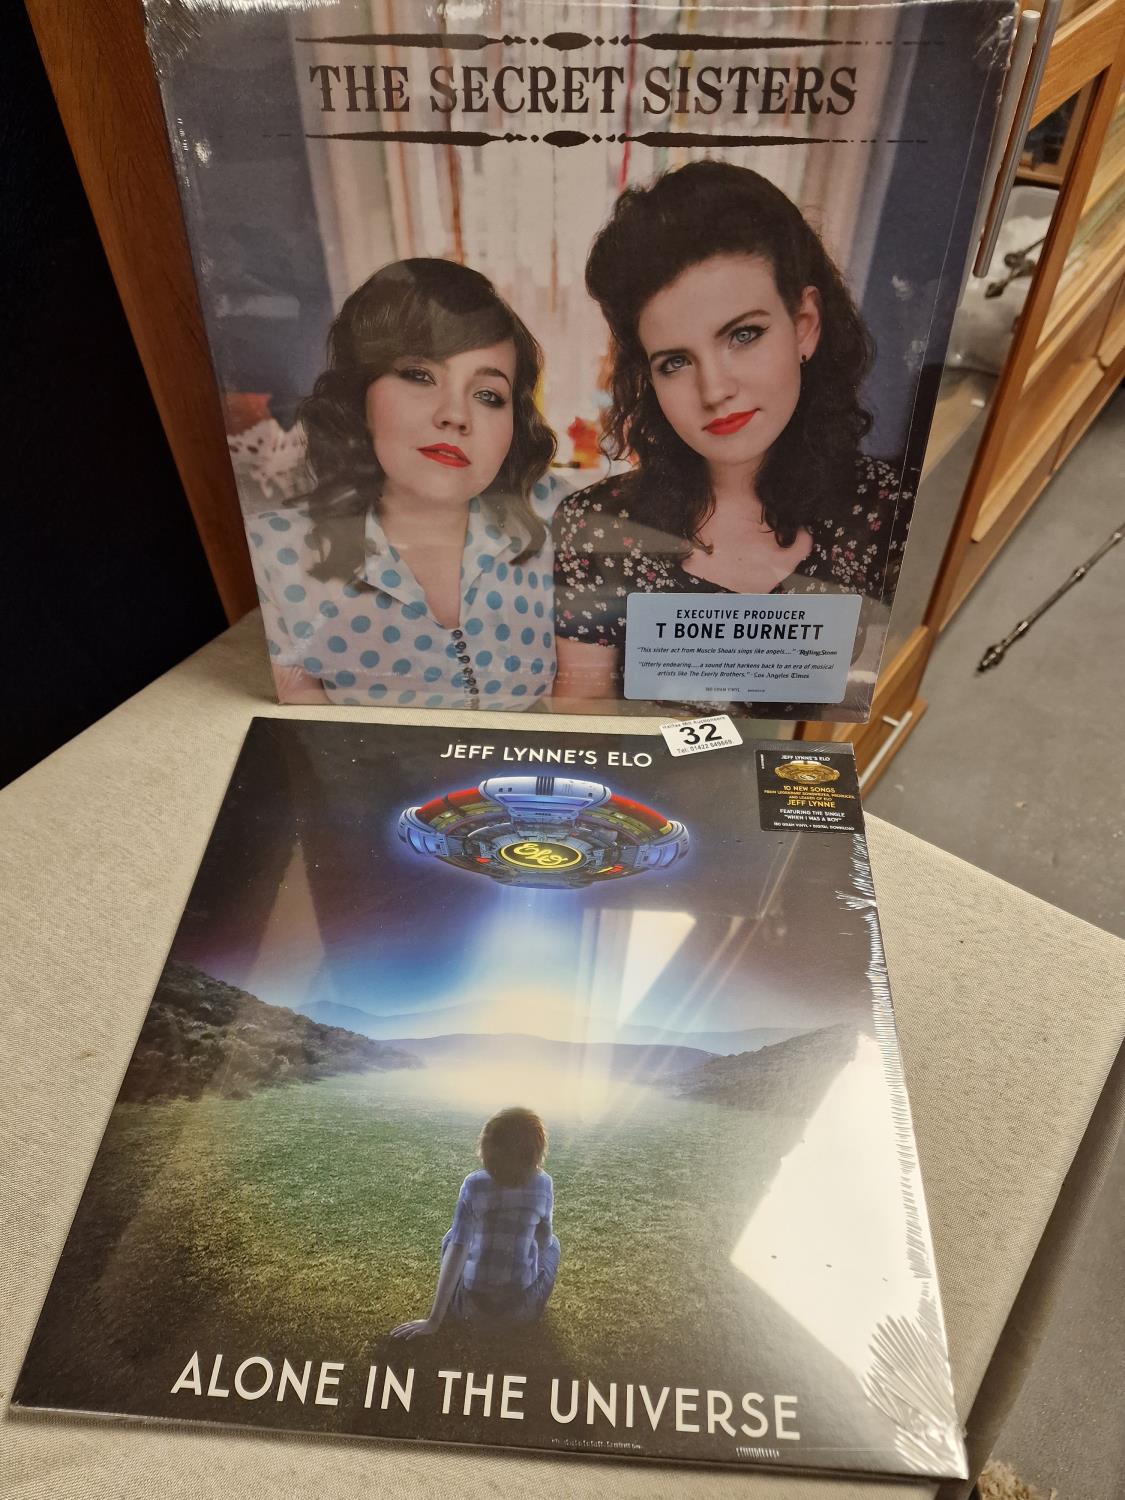 Pair of As-New Vinyl LP Records inc Jeff Lynne's ELO and the Secret Sisters